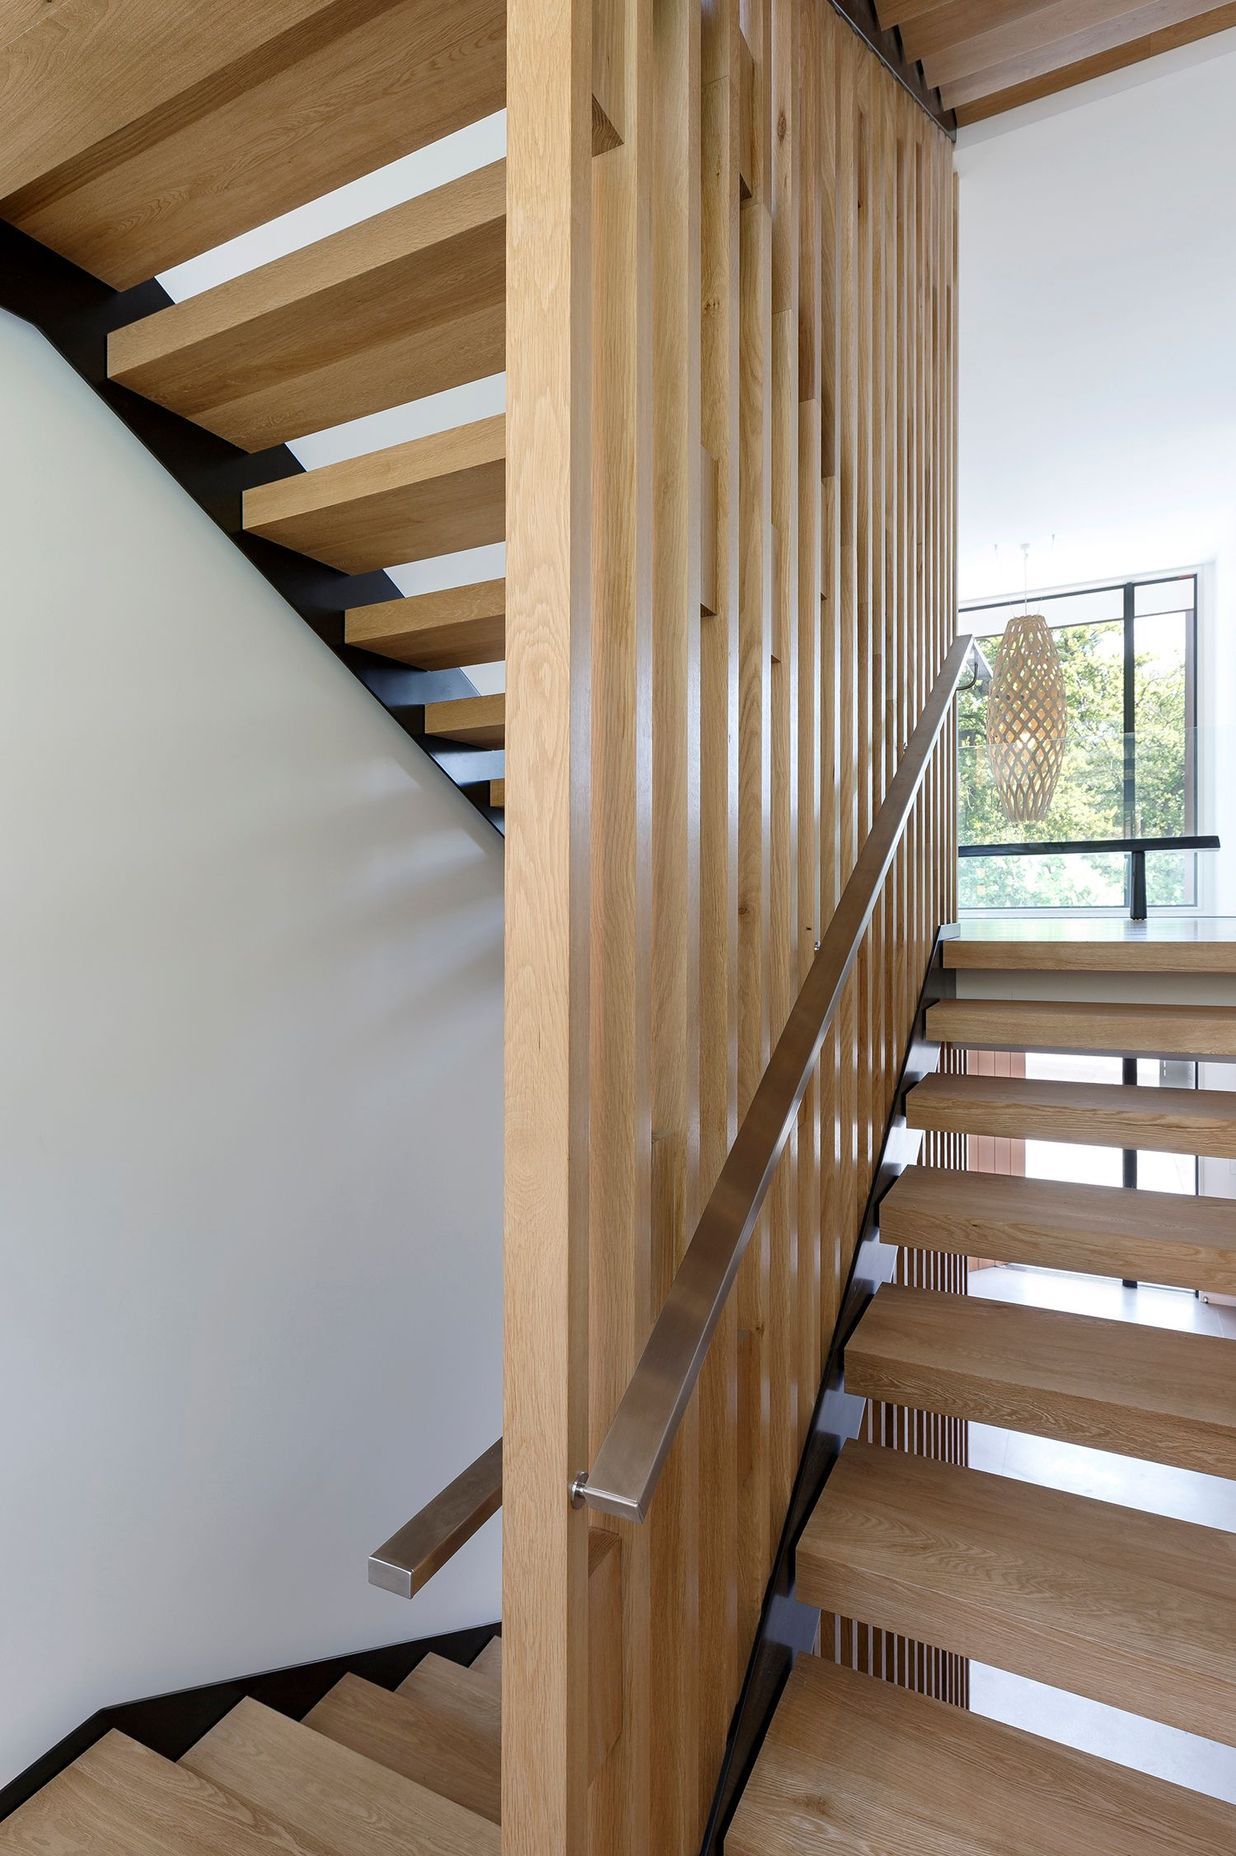 An American white oak timber stairwell links three storeys of the house.